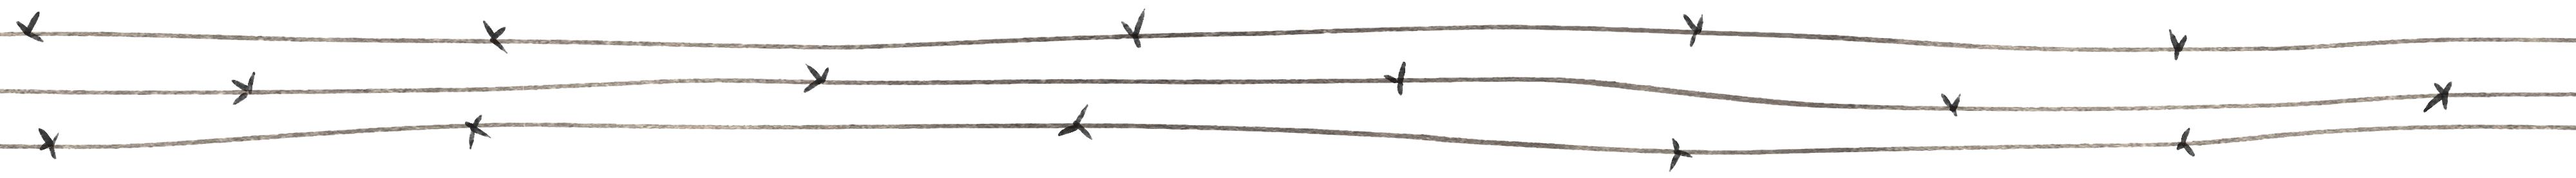 Illustration of three lines of barbed wire